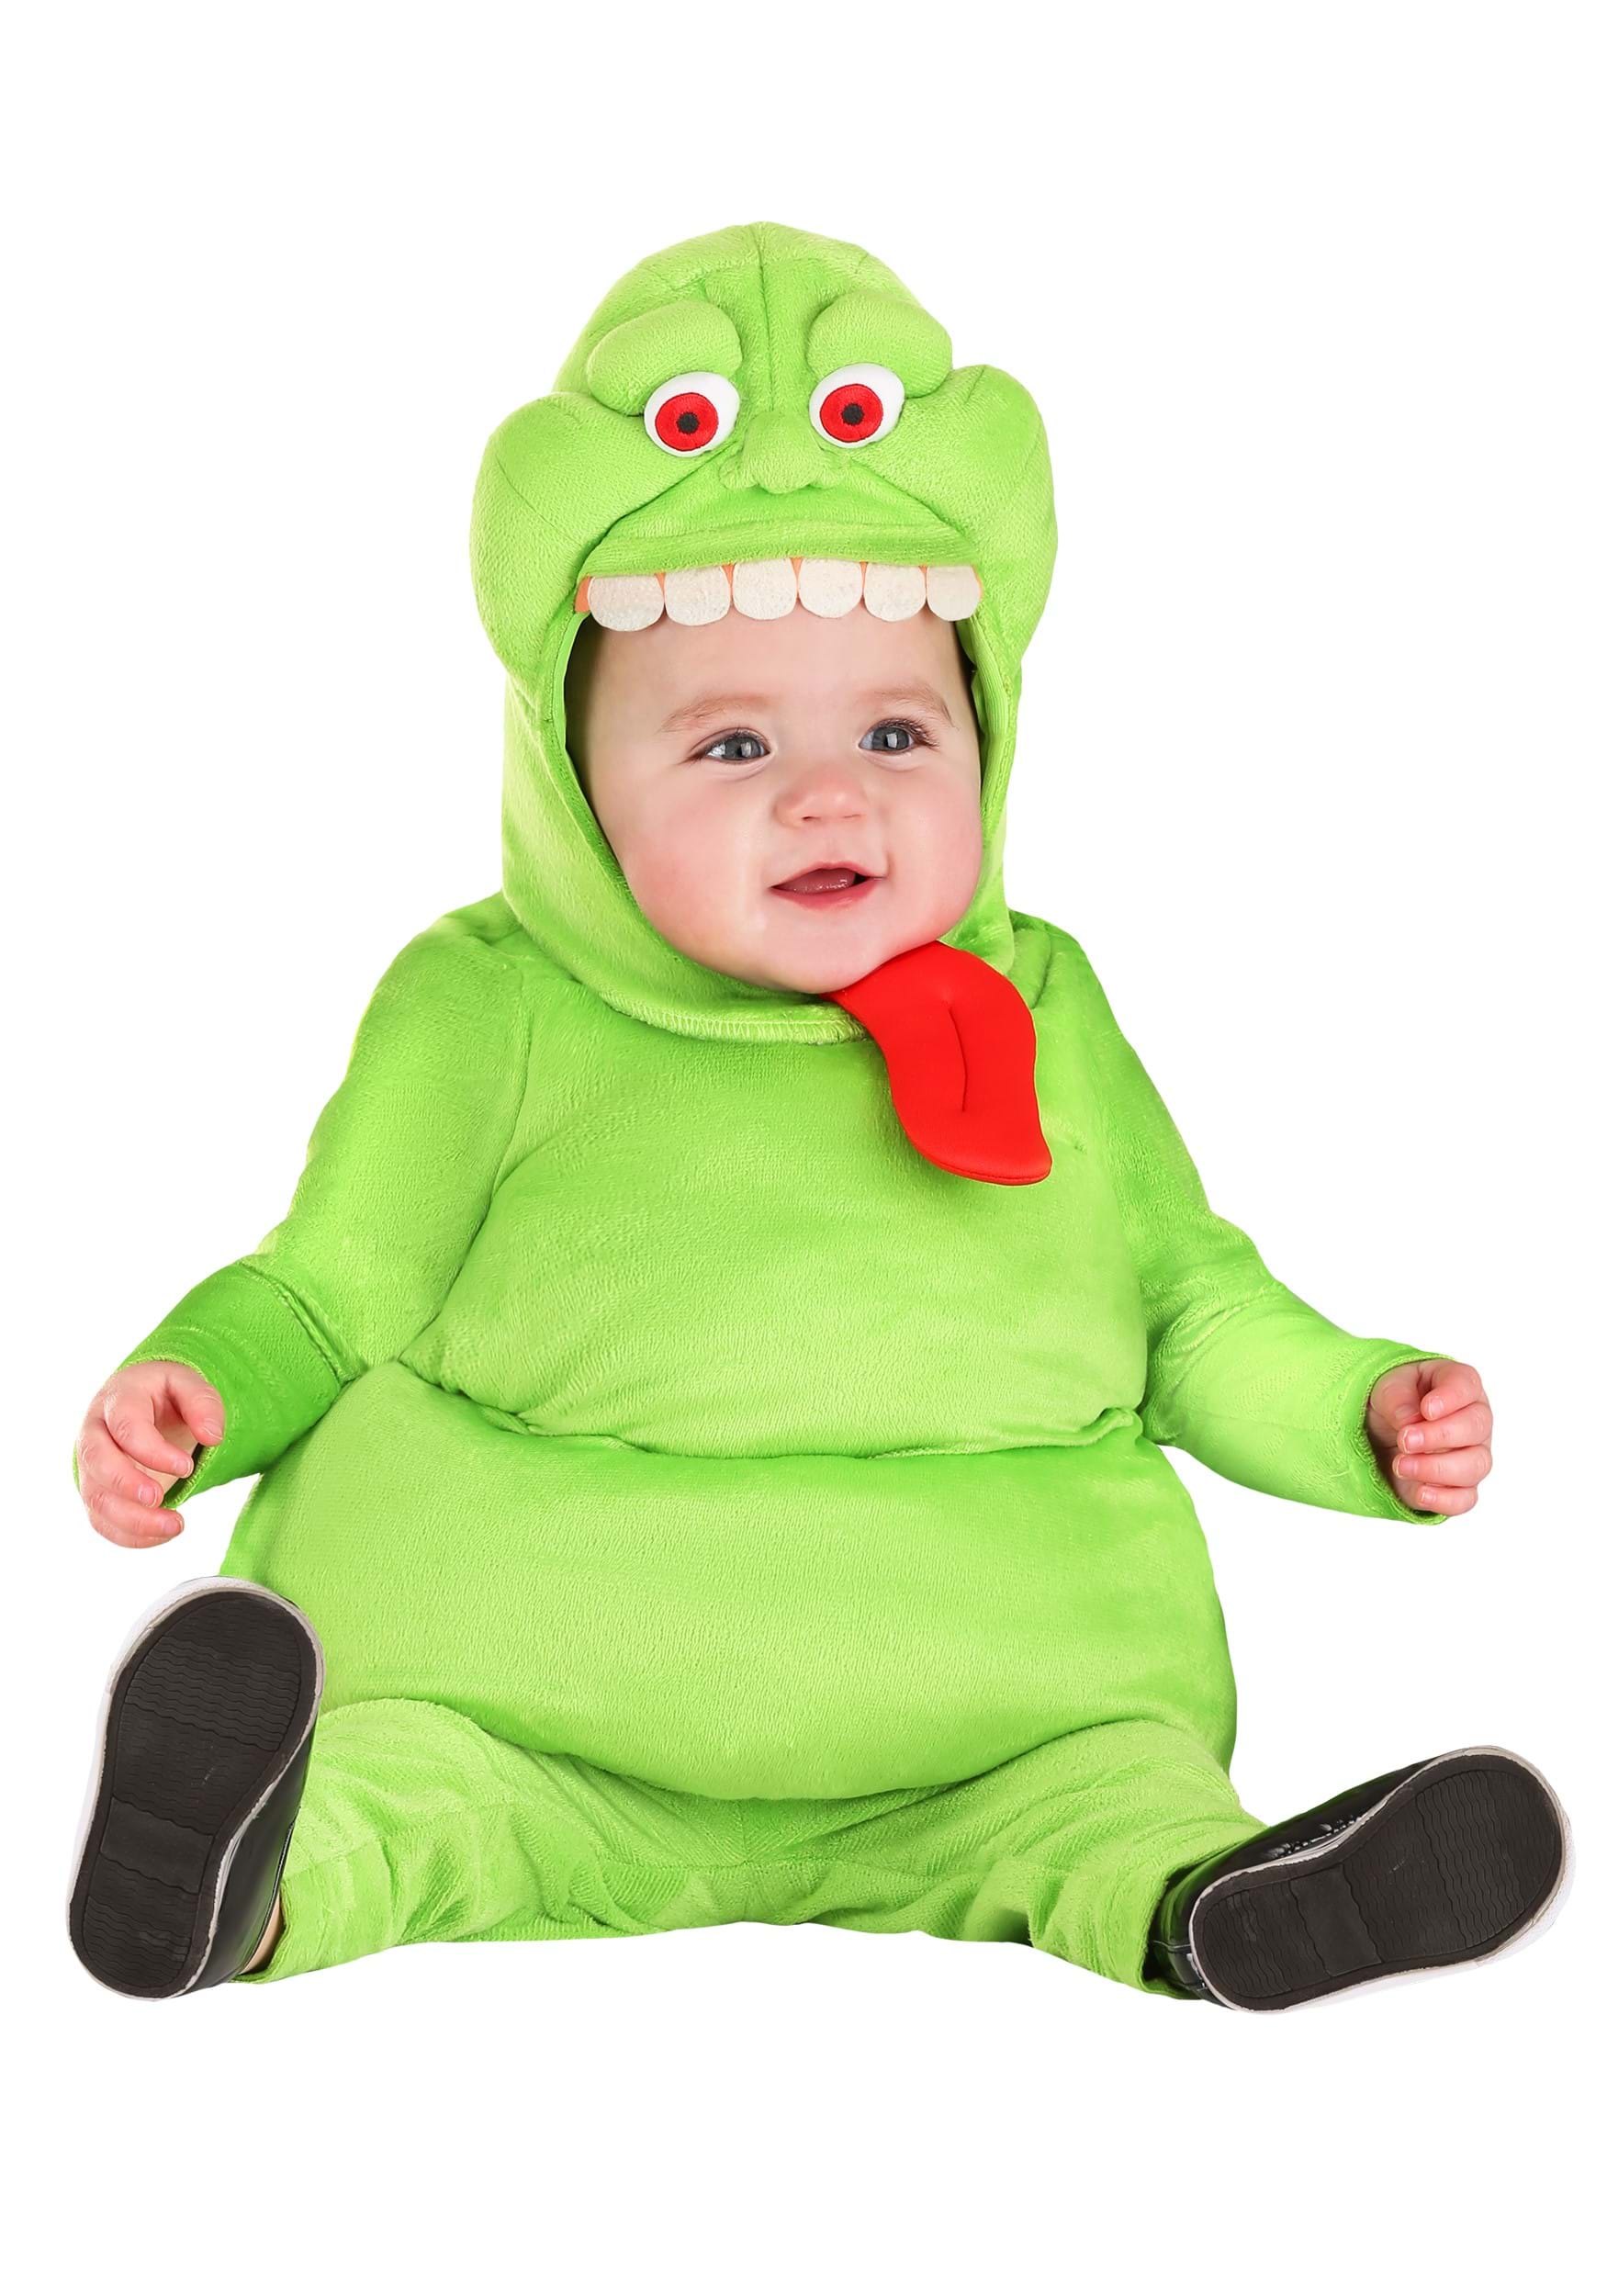 Photos - Fancy Dress Ghostbusters FUN Costumes  Slimer Costume For Infants Green/Red FUN0857 